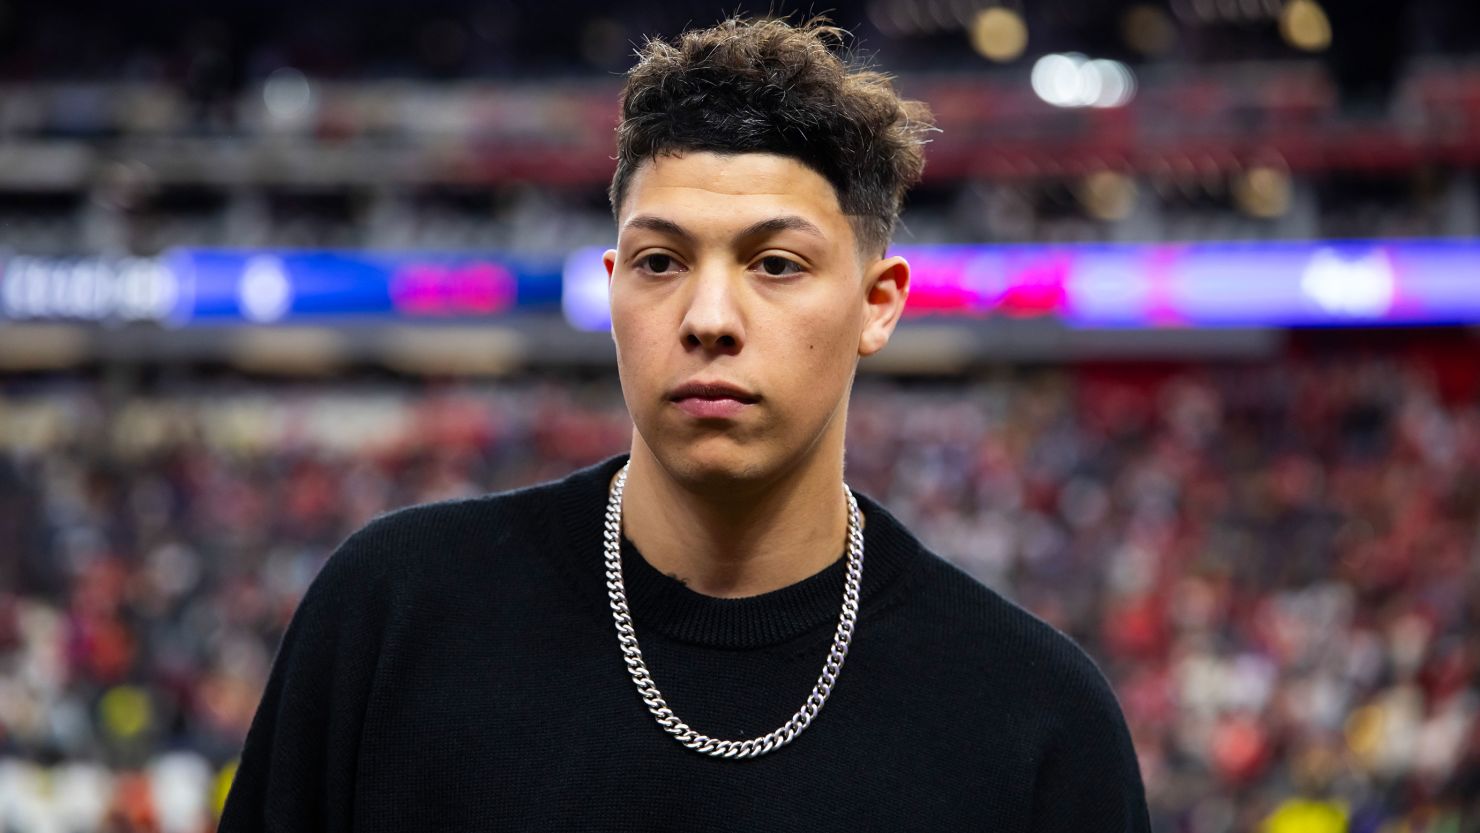 Jackson Mahomes on the sidelines before the Chiefs won the Super Bowl in February.